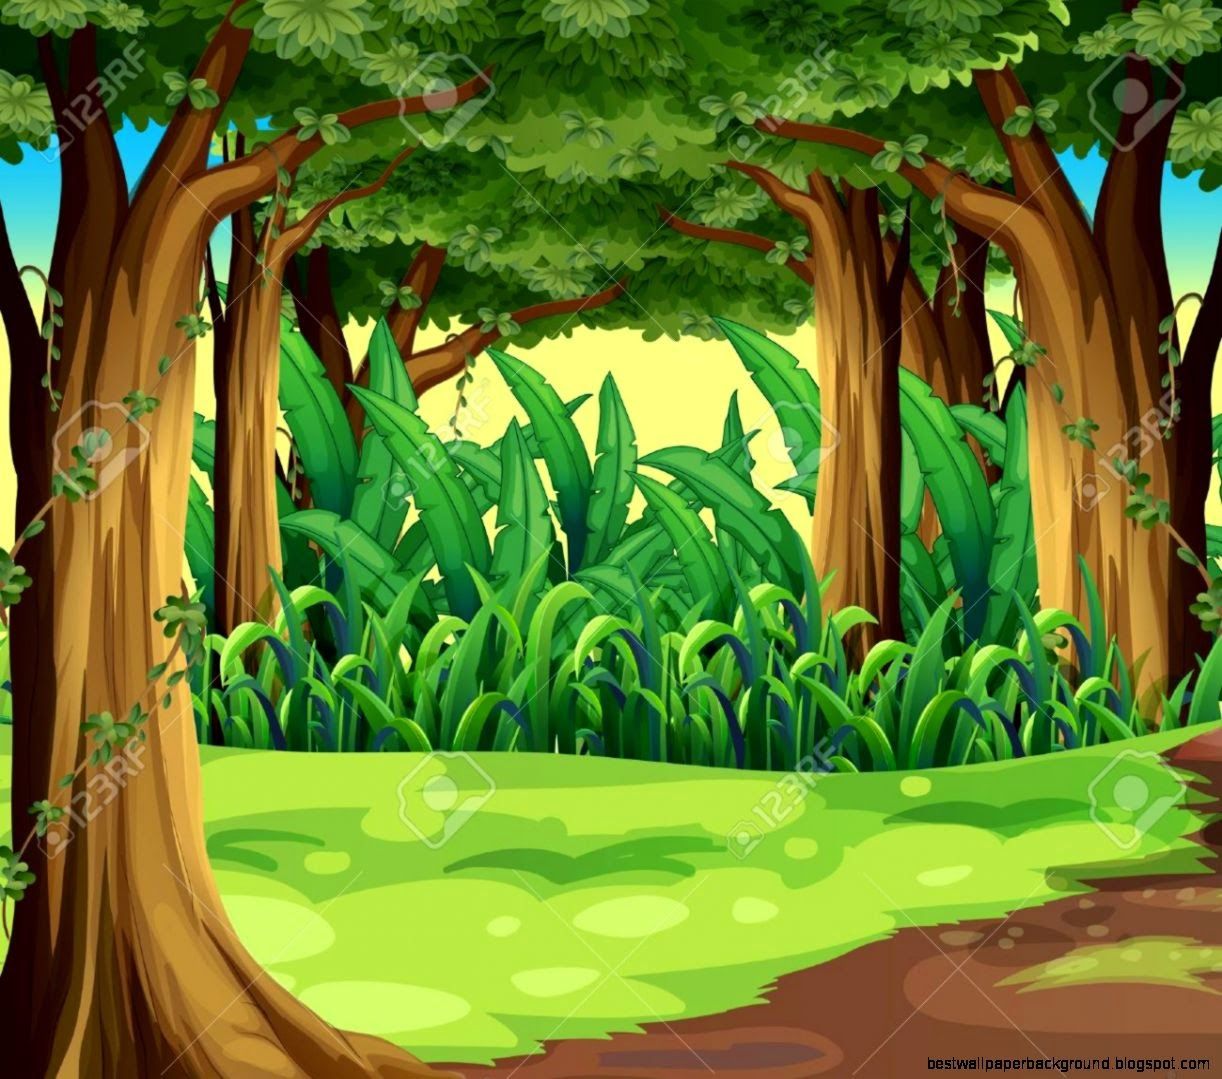 clipart forest background image